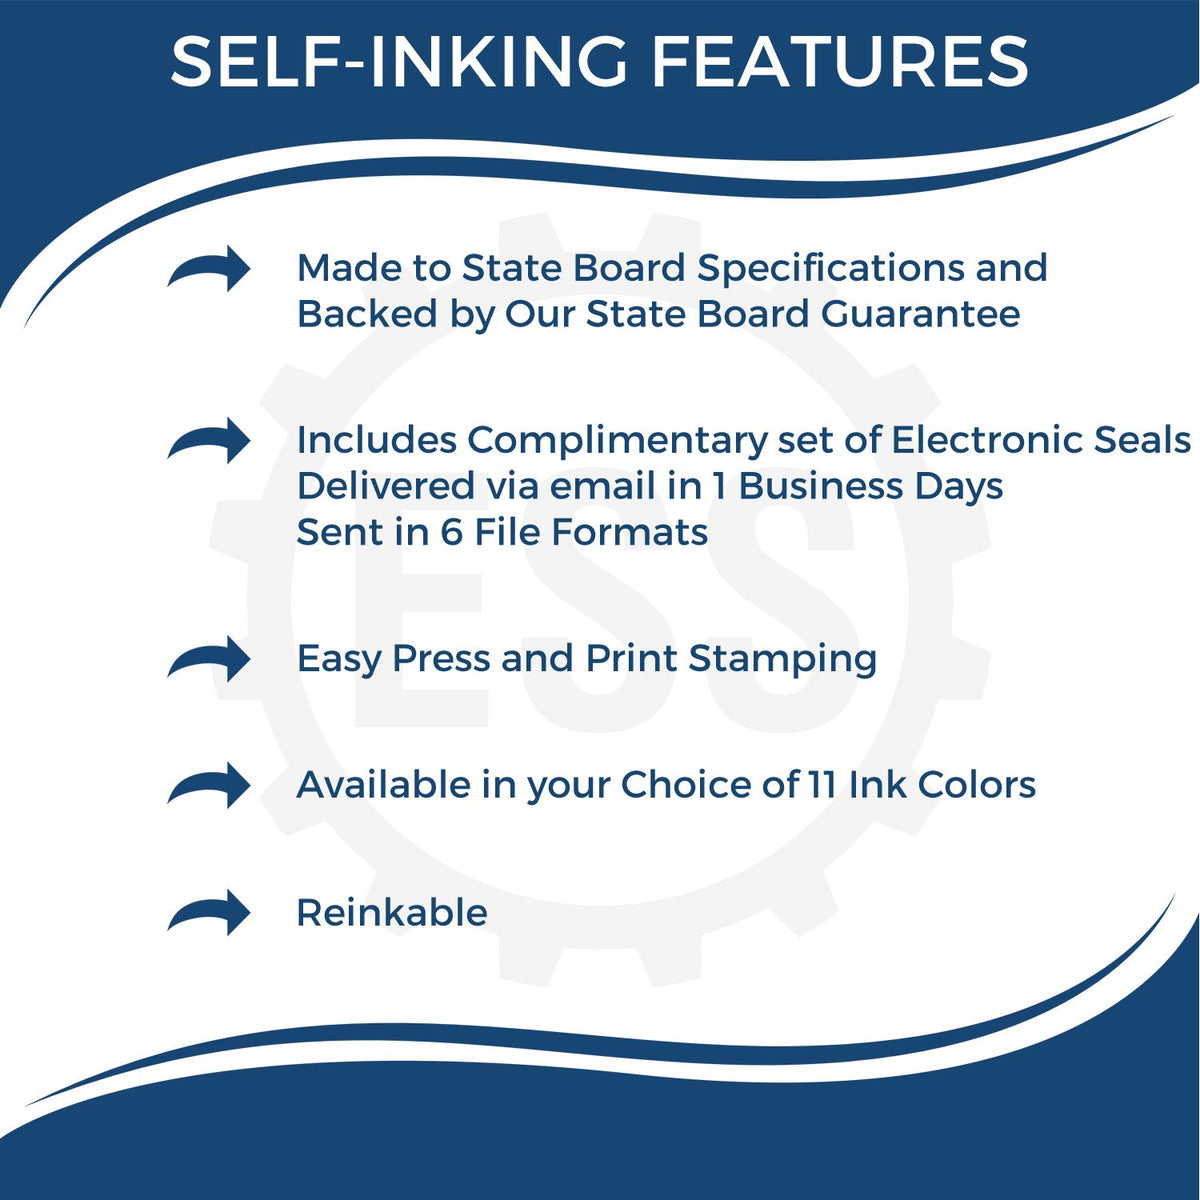 A picture of an infographic highlighting the selling points for the Self-Inking Montana Landscape Architect Stamp